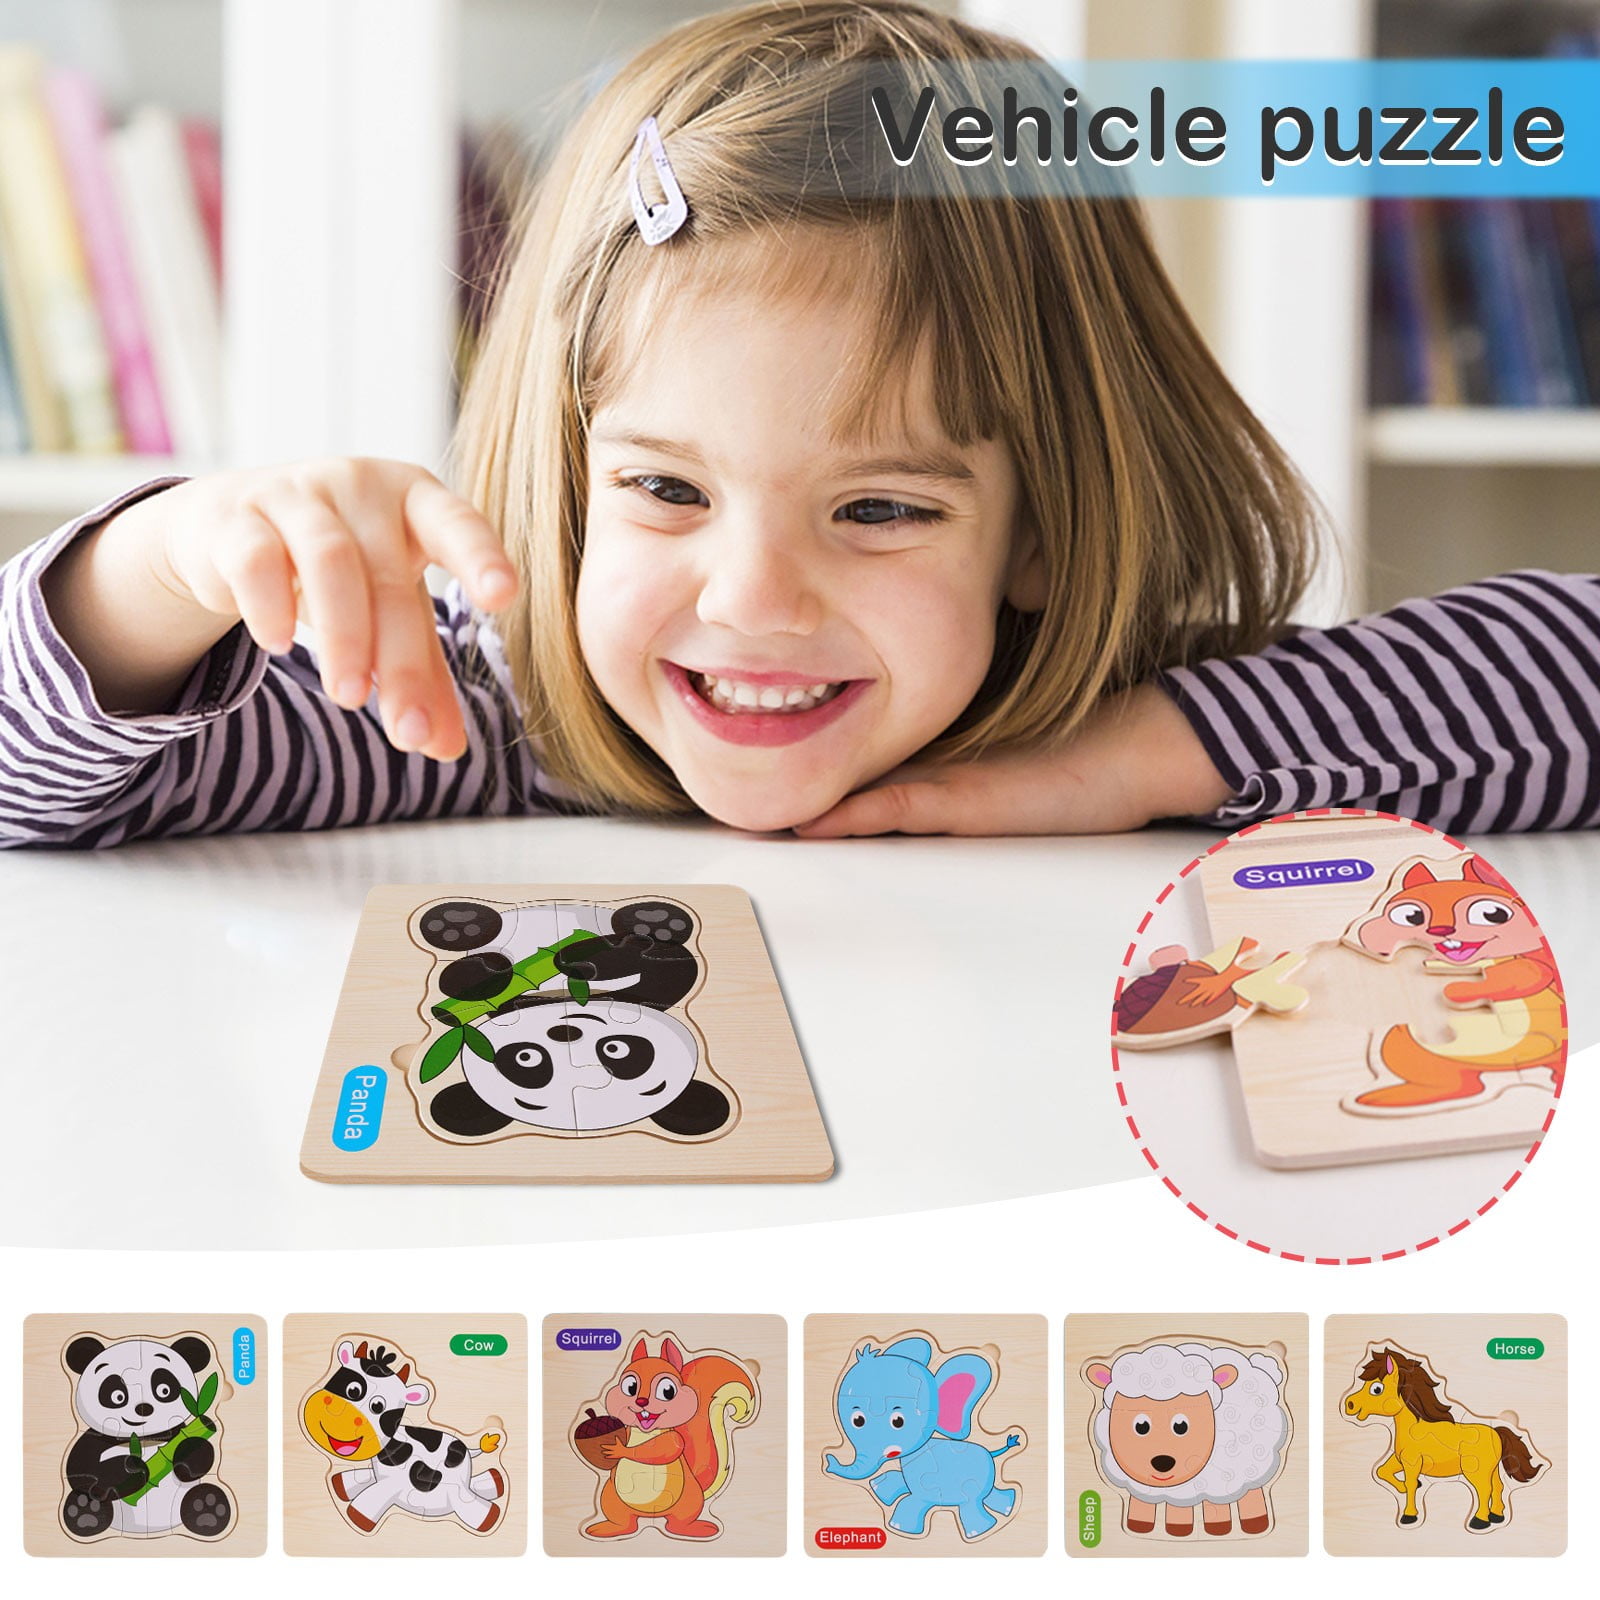 wodofoxo-puzzles-for-kids-ages-2-4-6-pack-wooden-puzzles-for-toddlers-preschool-educational